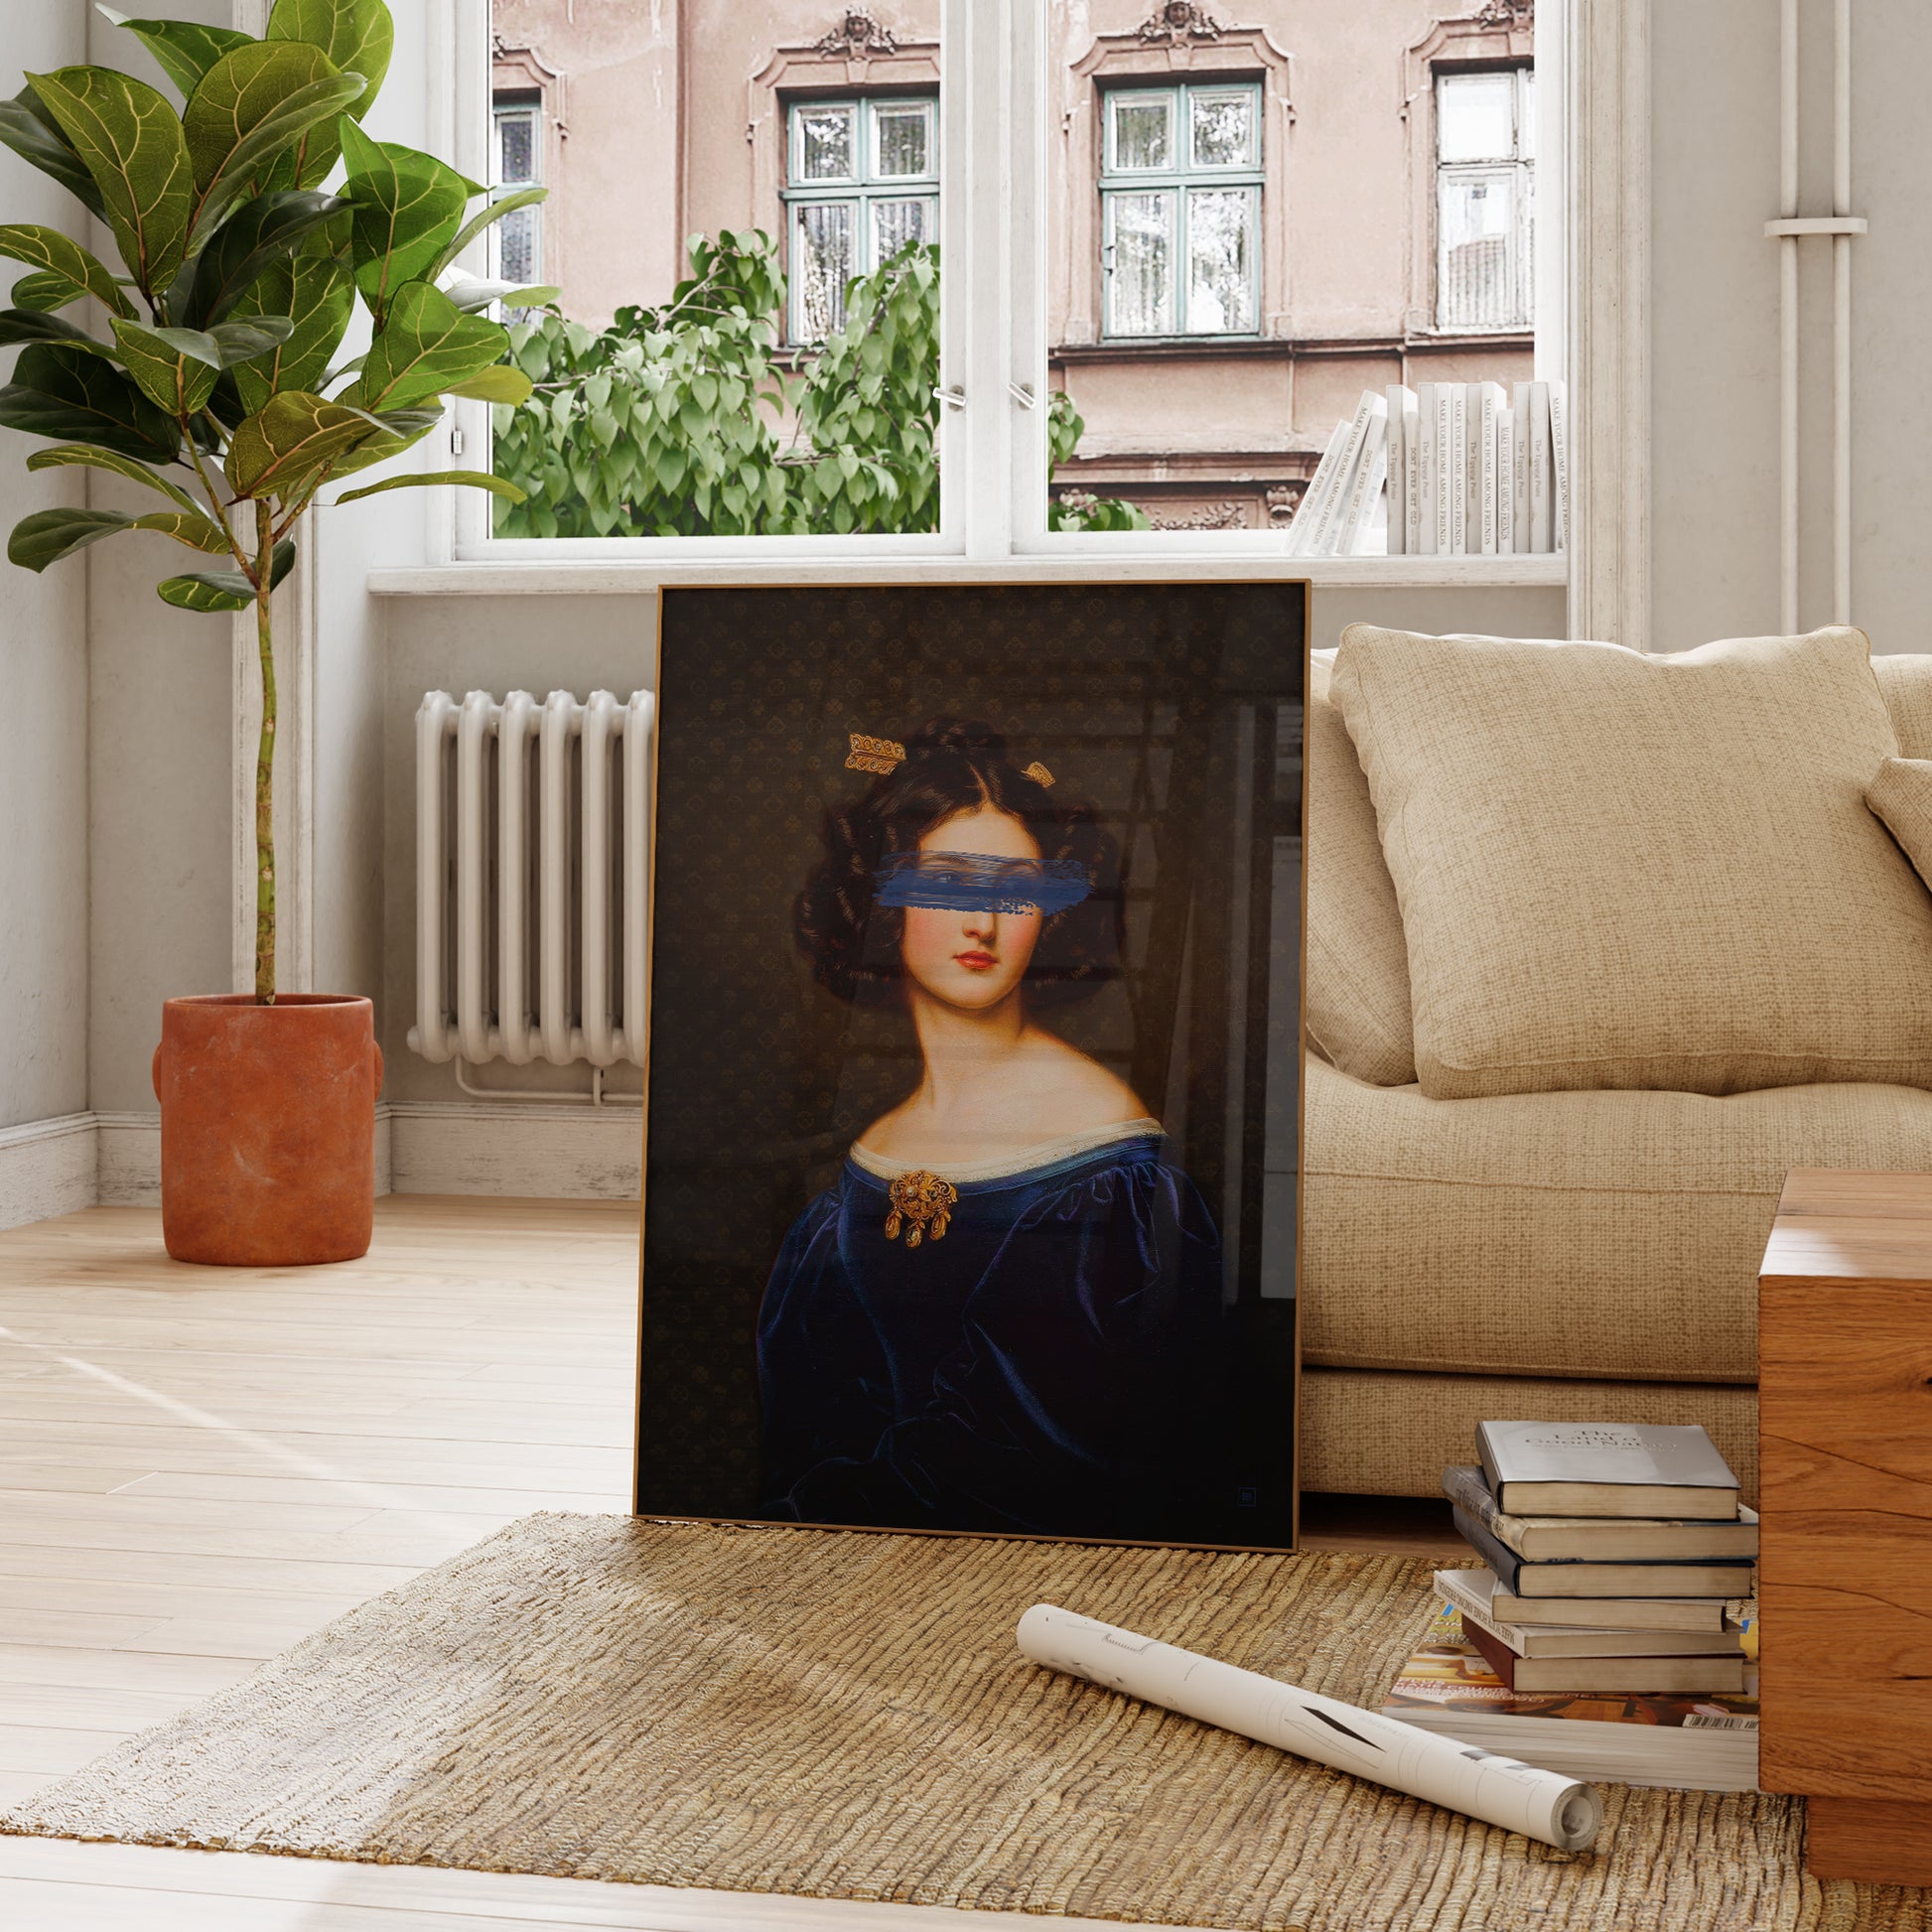 Be inspired by our "Dark and Moody Portrait of Nanette" art print! This artwork was printed using the giclée process on archival acid-free paper and is showcased in a French living room, capturing its timeless beauty in every detail.